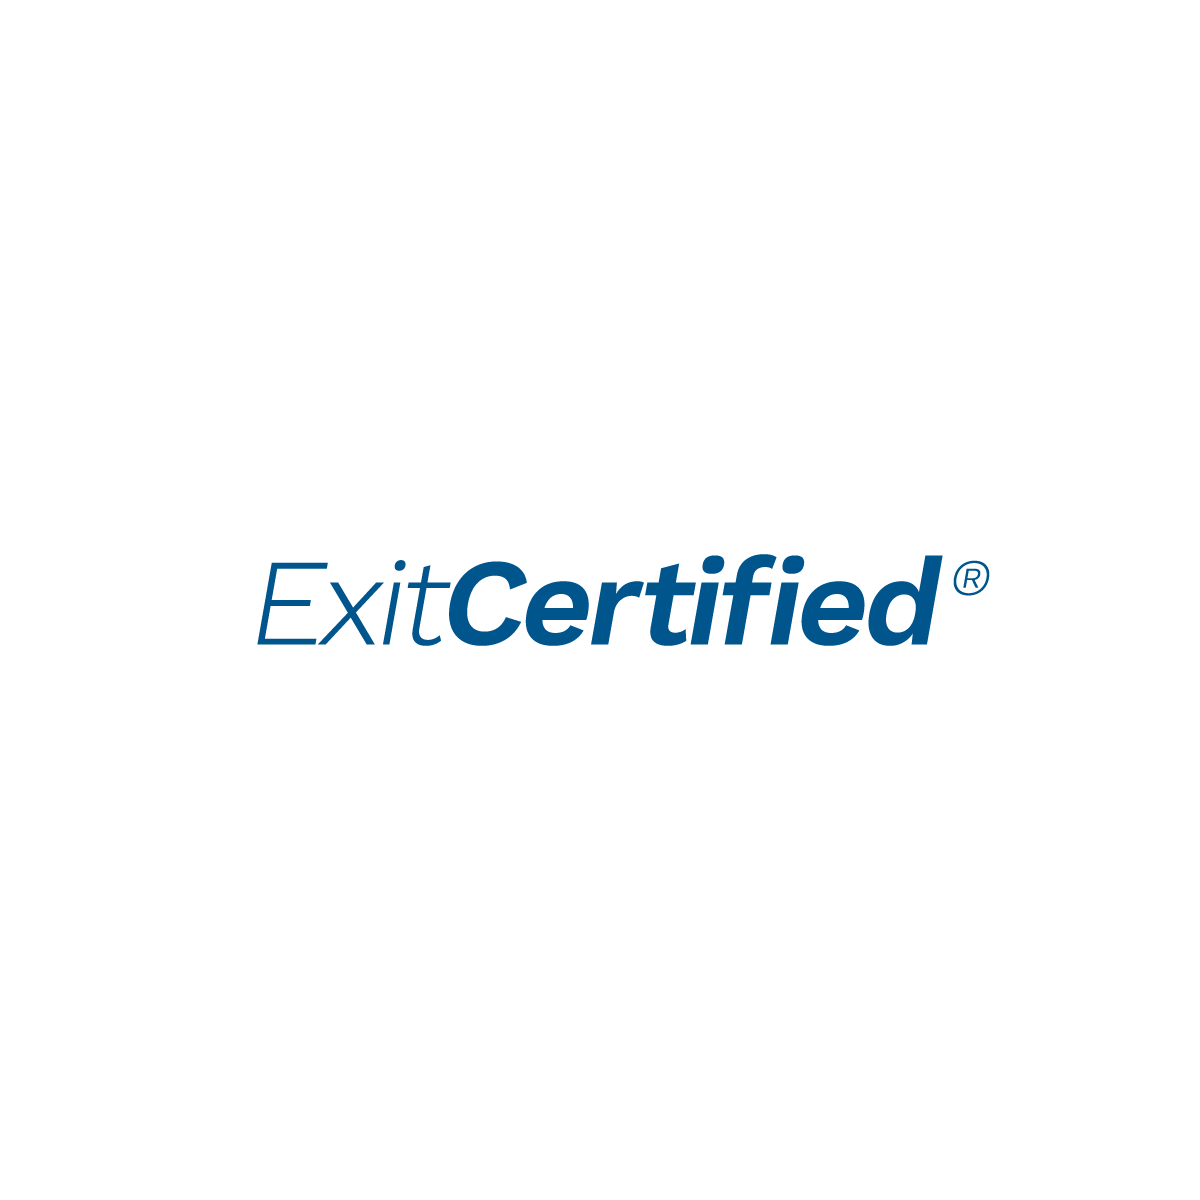 Microsoft Training Courses | ExitCertified